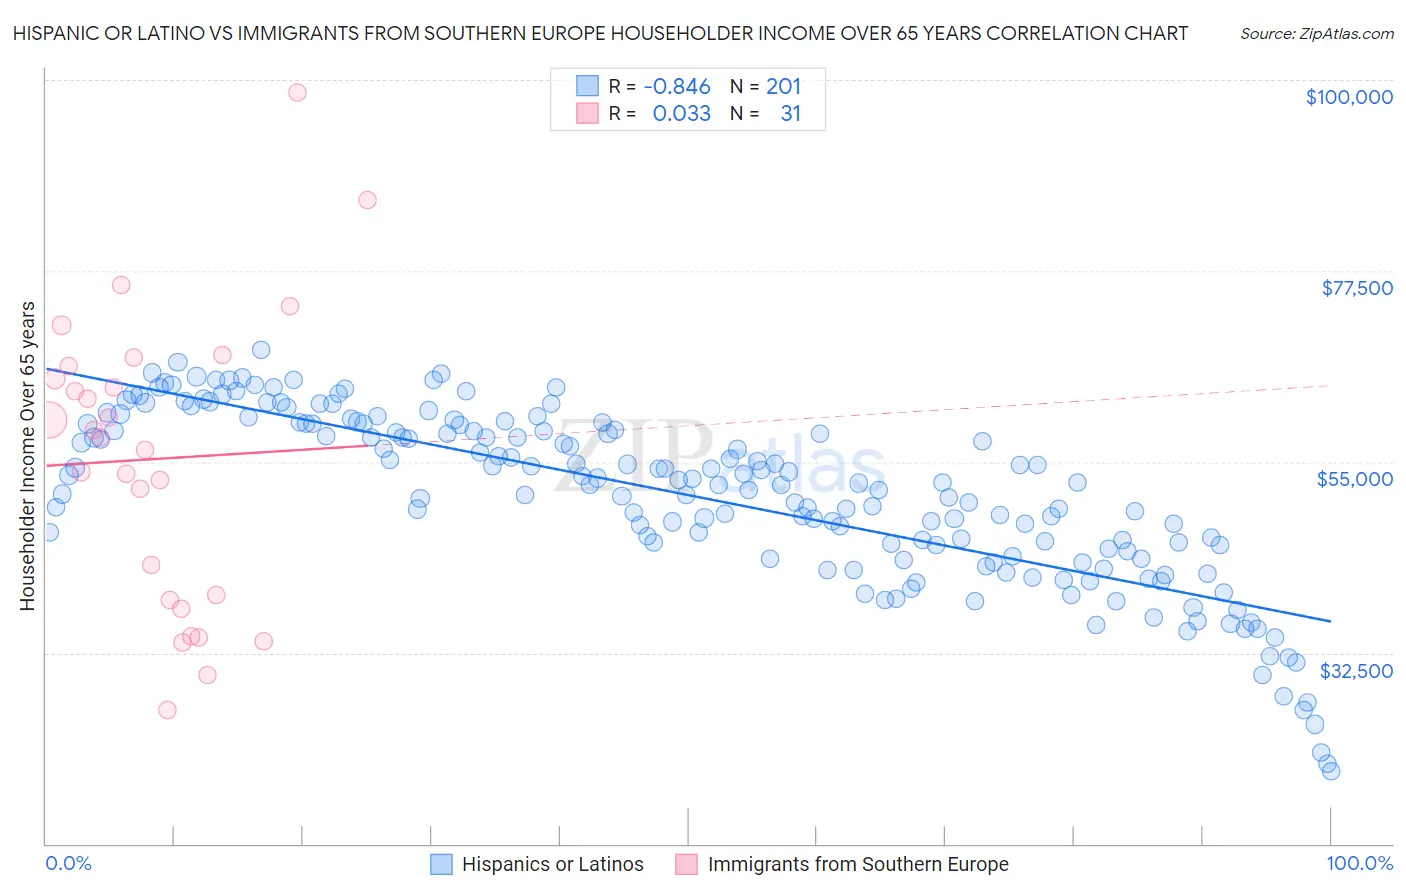 Hispanic or Latino vs Immigrants from Southern Europe Householder Income Over 65 years